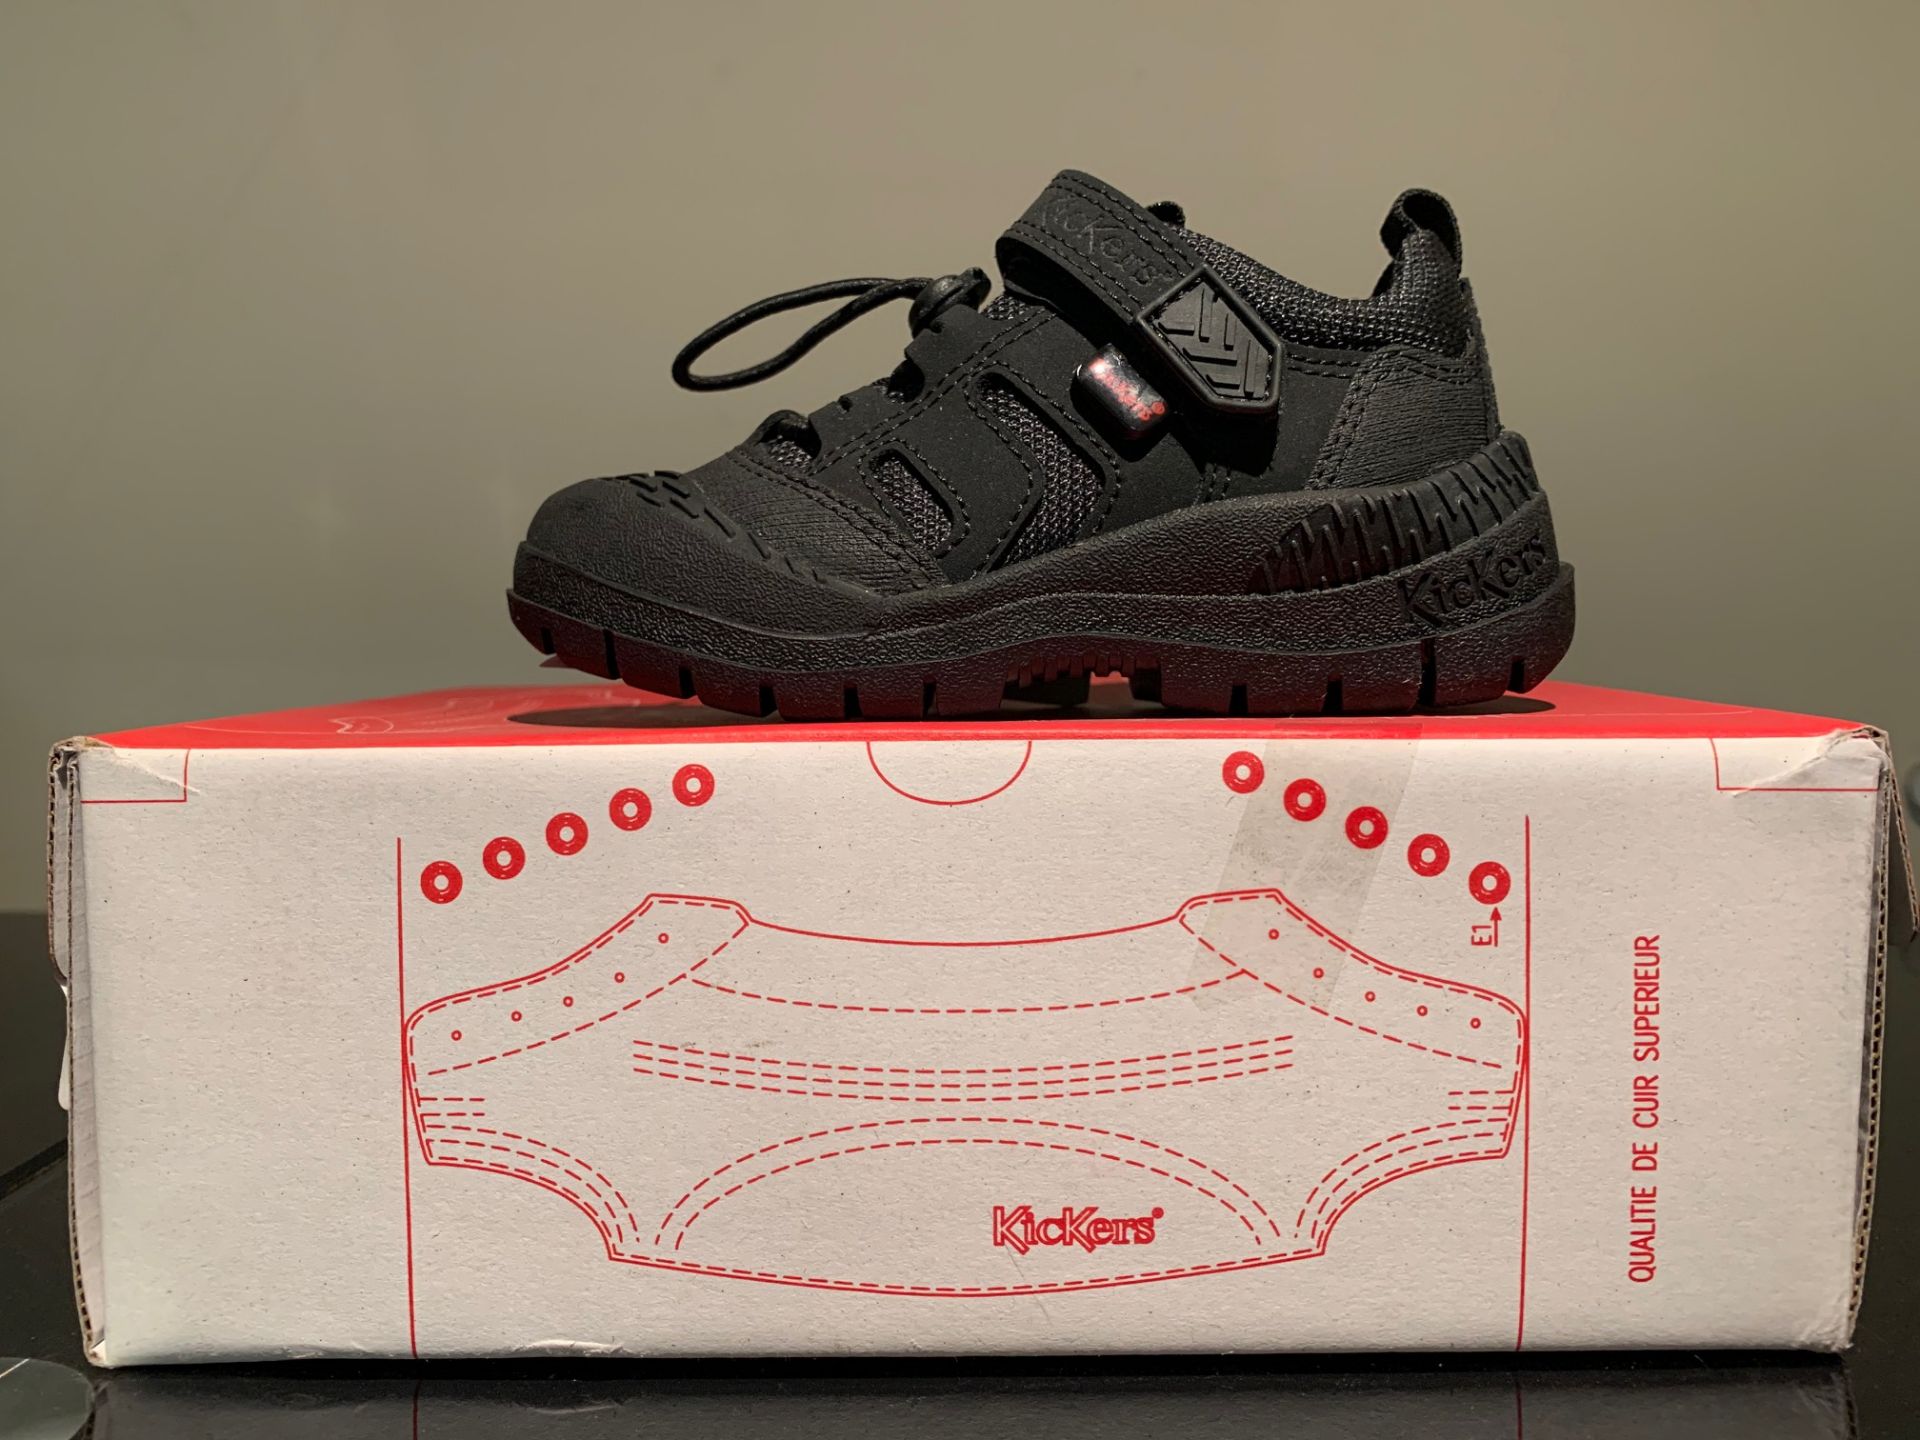 NEW & BOXED KICKERS TRAINER SIZE INFANT 5 (196 UPSTAIRS)